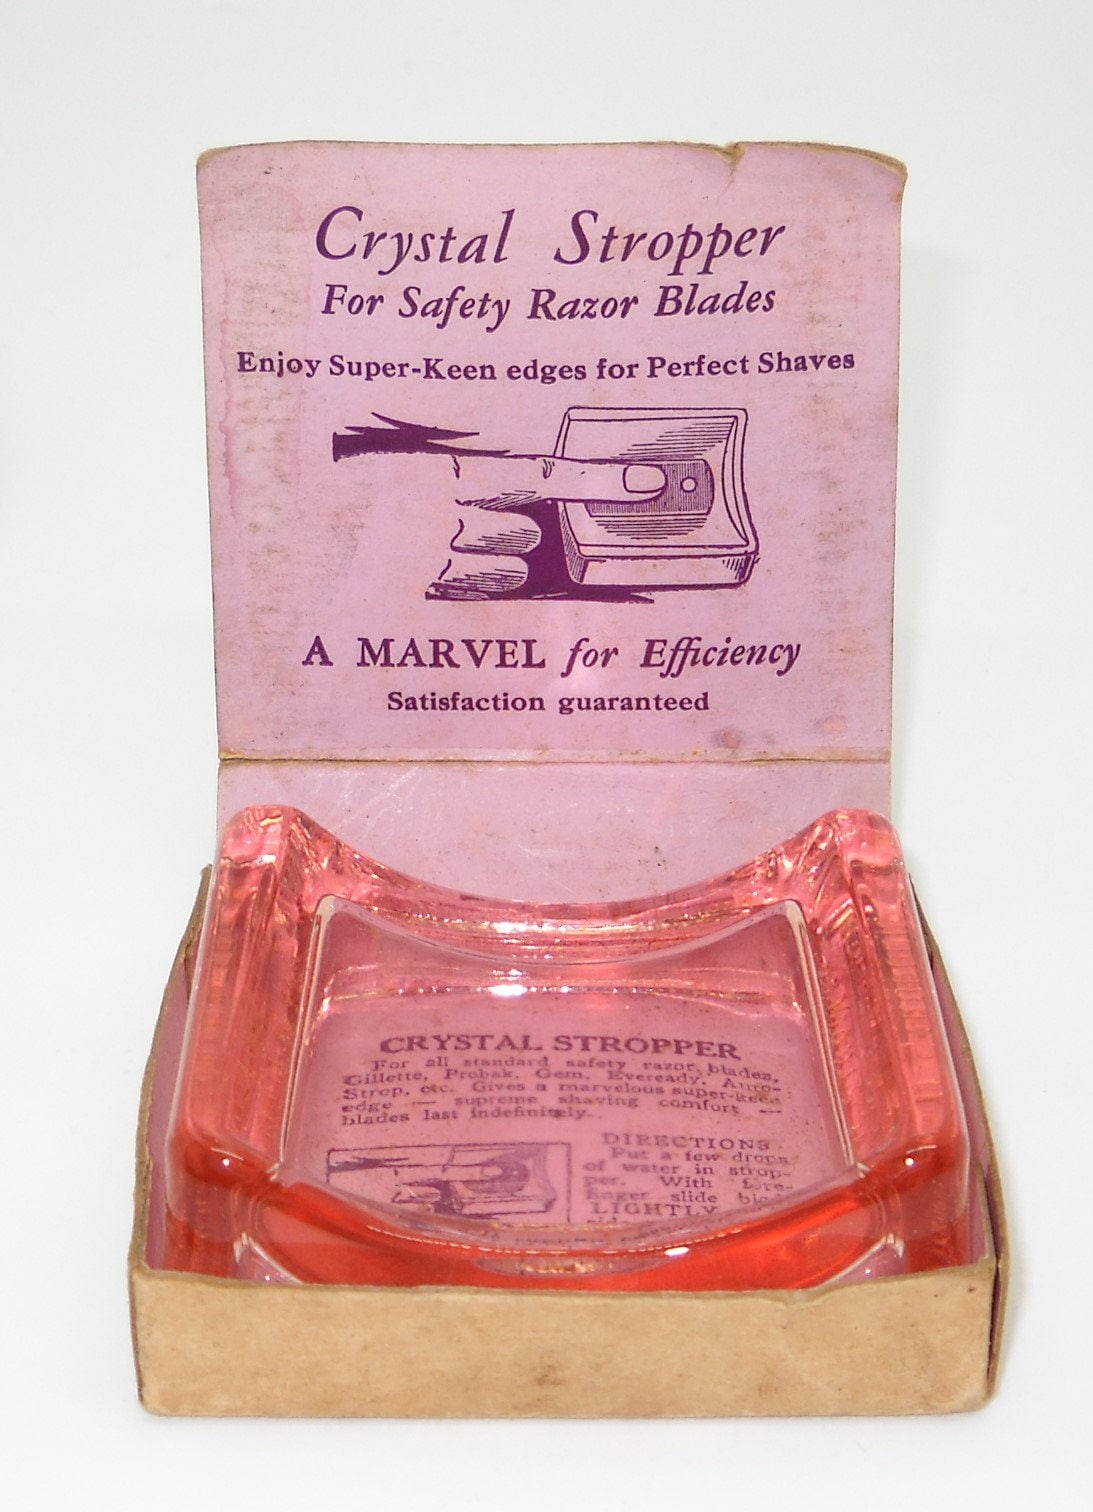 Glass Hone Safety Razor Blade Sharpener by Crystal Stropper Co. Milton Ma  in Original Box New Old Stock